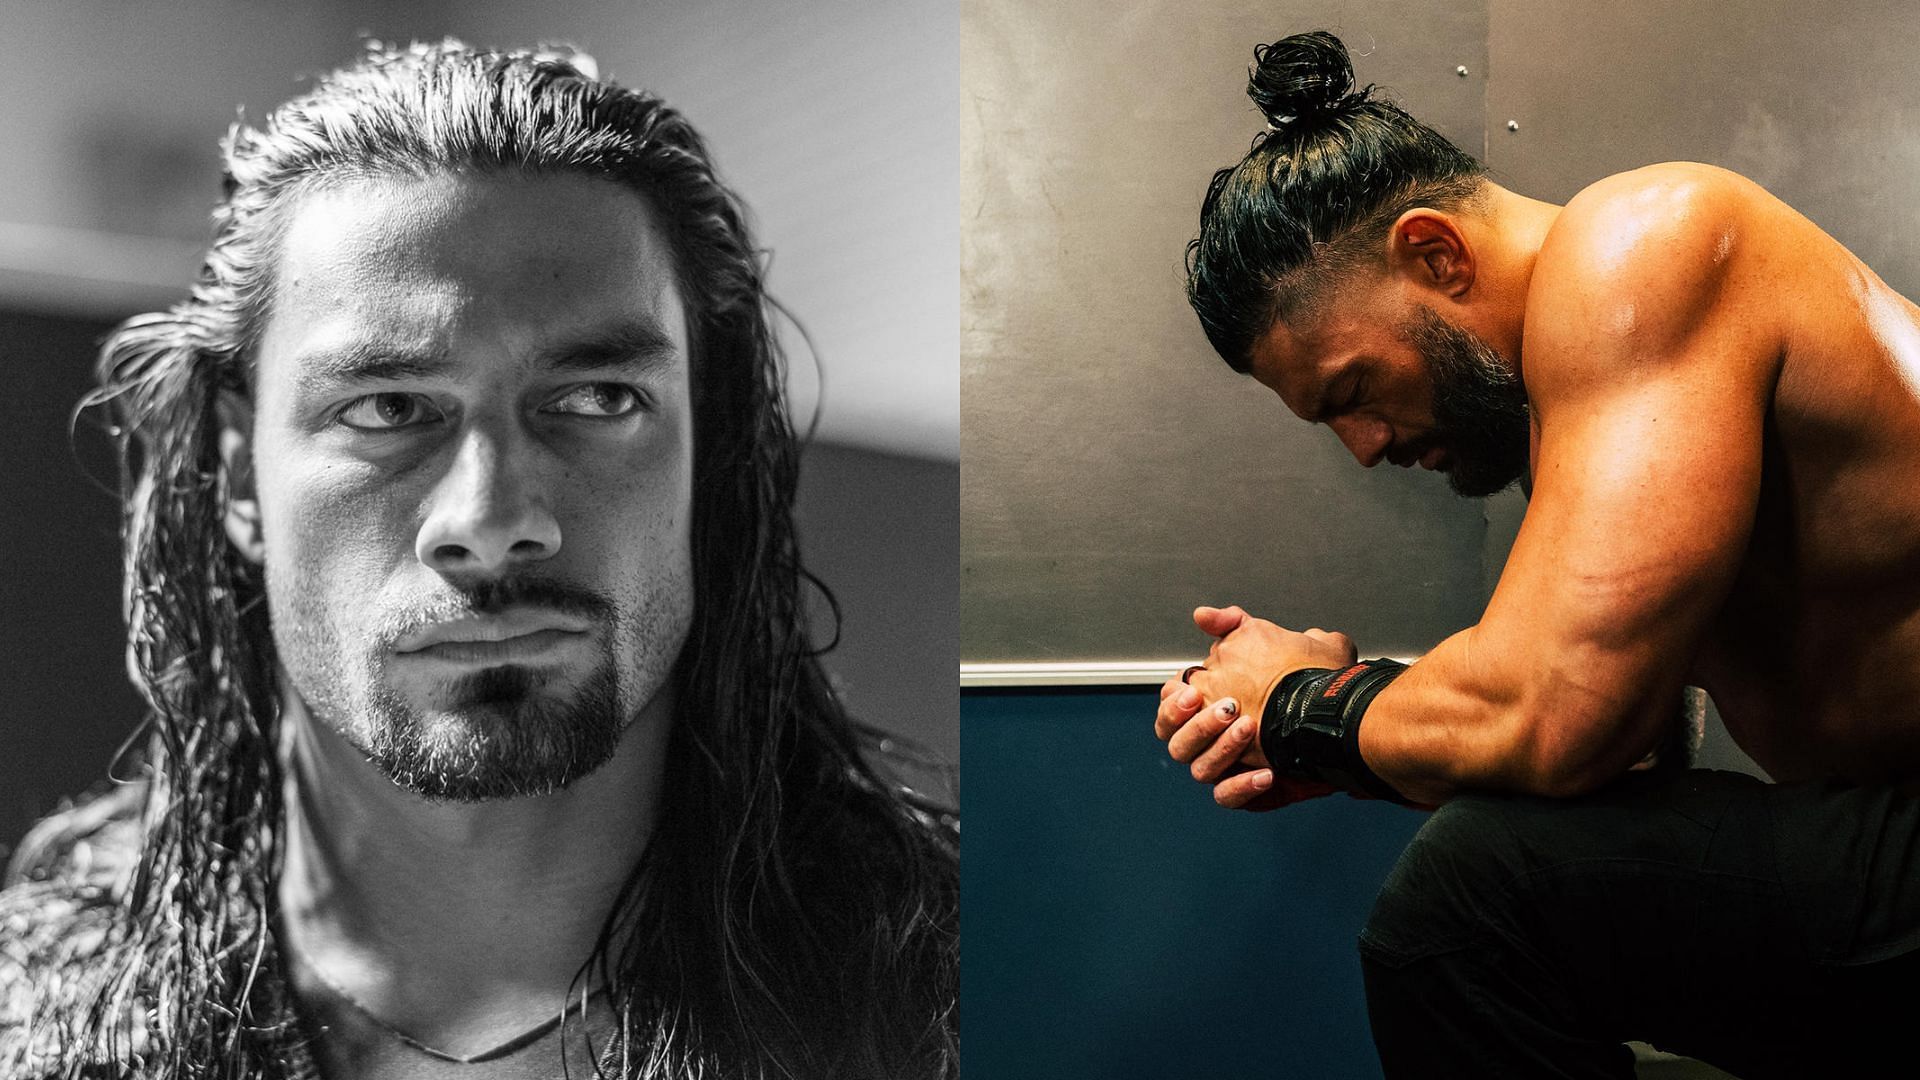 Roman Reigns then (left) and now (right)